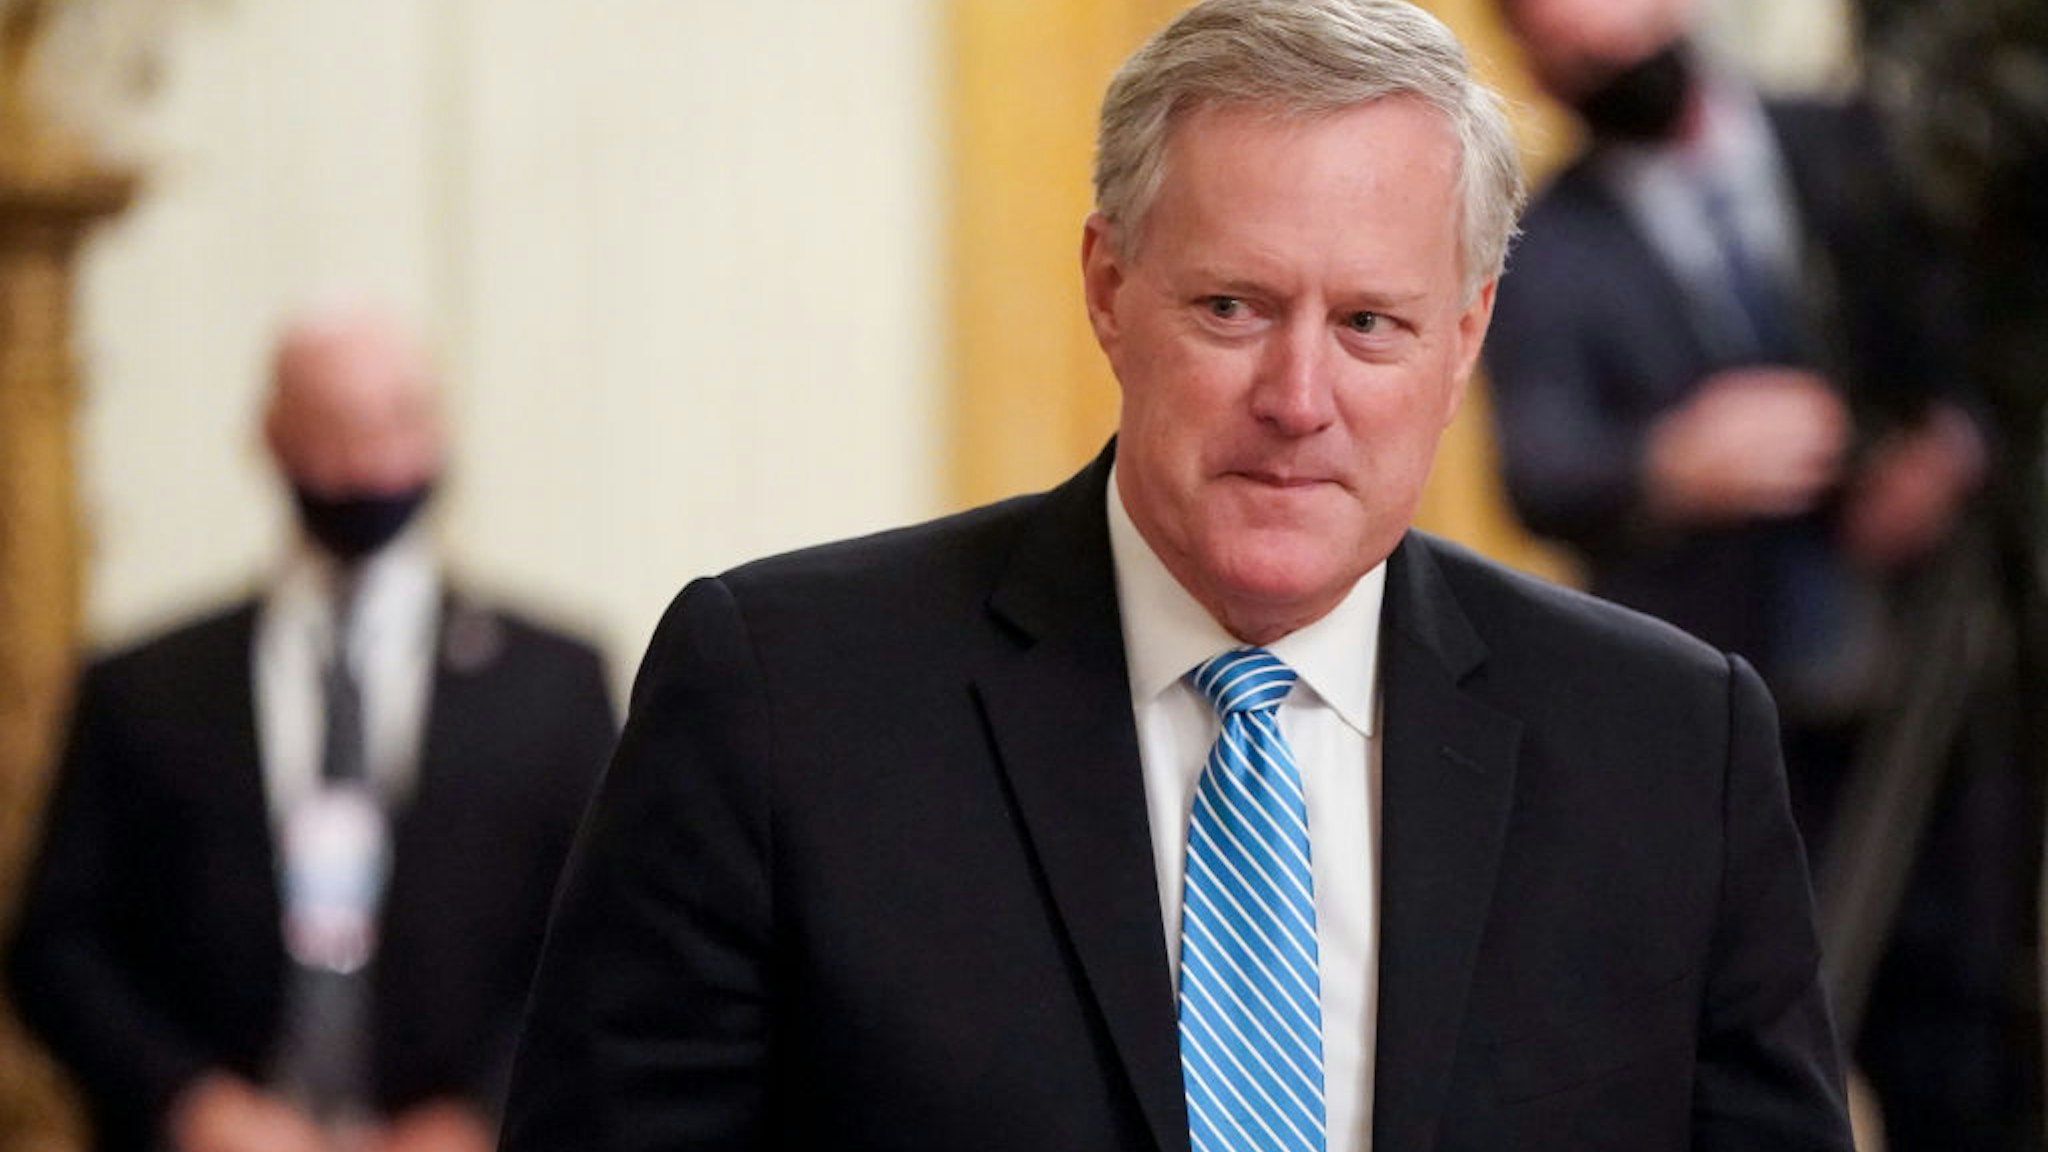 U.S. White House Chief of Staff Mark Meadows departs after President Donald Trump delivered remarks in honor of Bay of Pigs Veterans in the East Room of the White House on September 23, 2020 in Washington, DC.